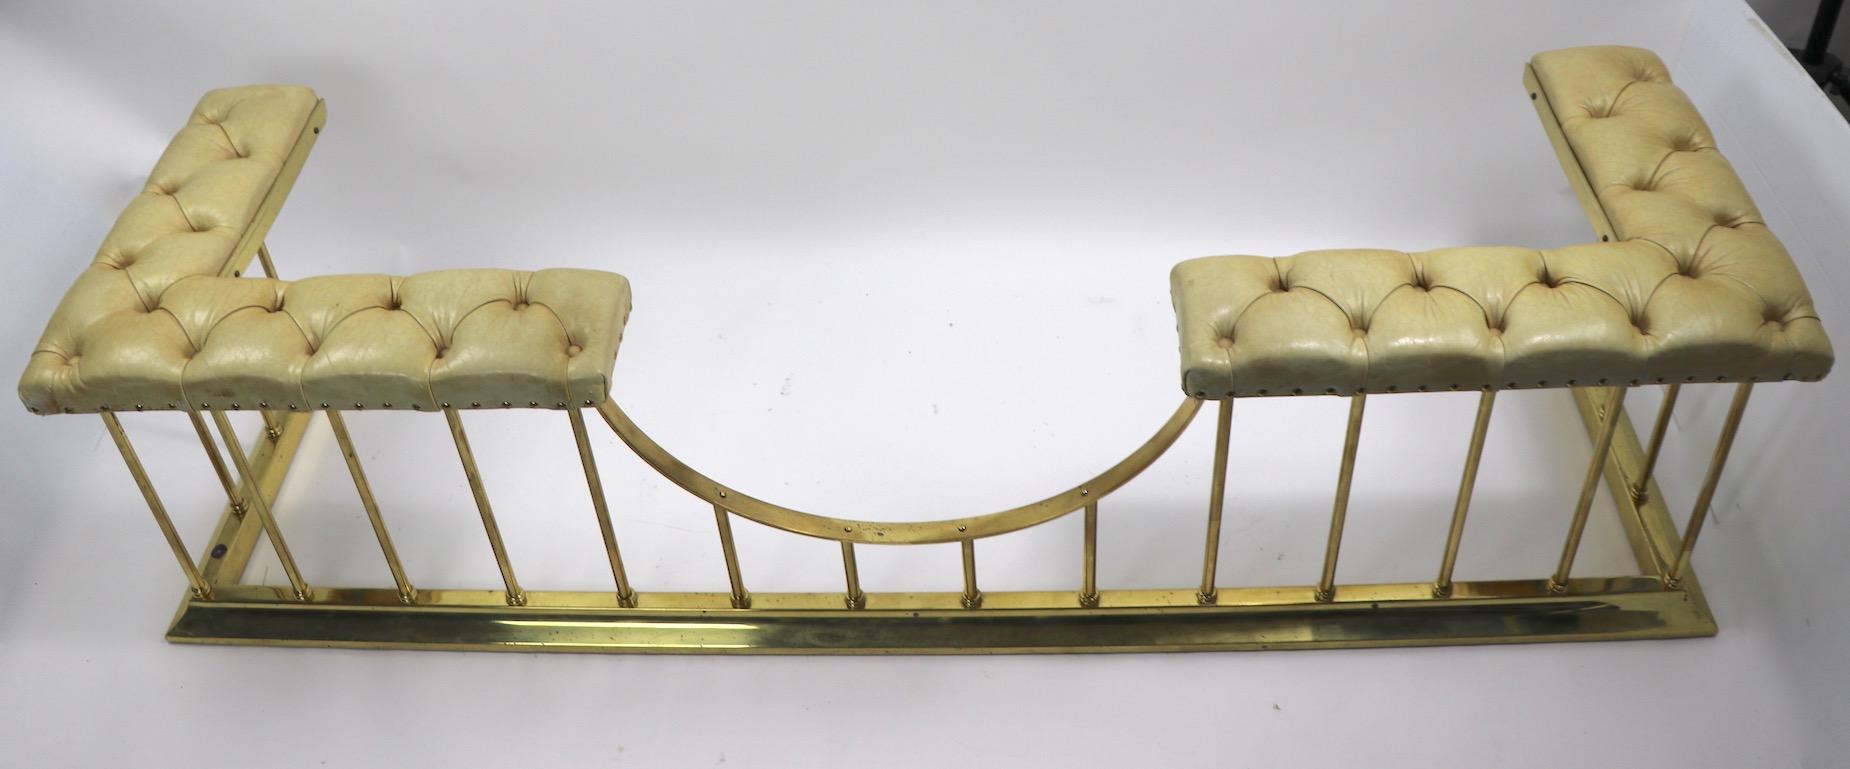 Large Scale Bench Club Fender in Brass and Leather 8